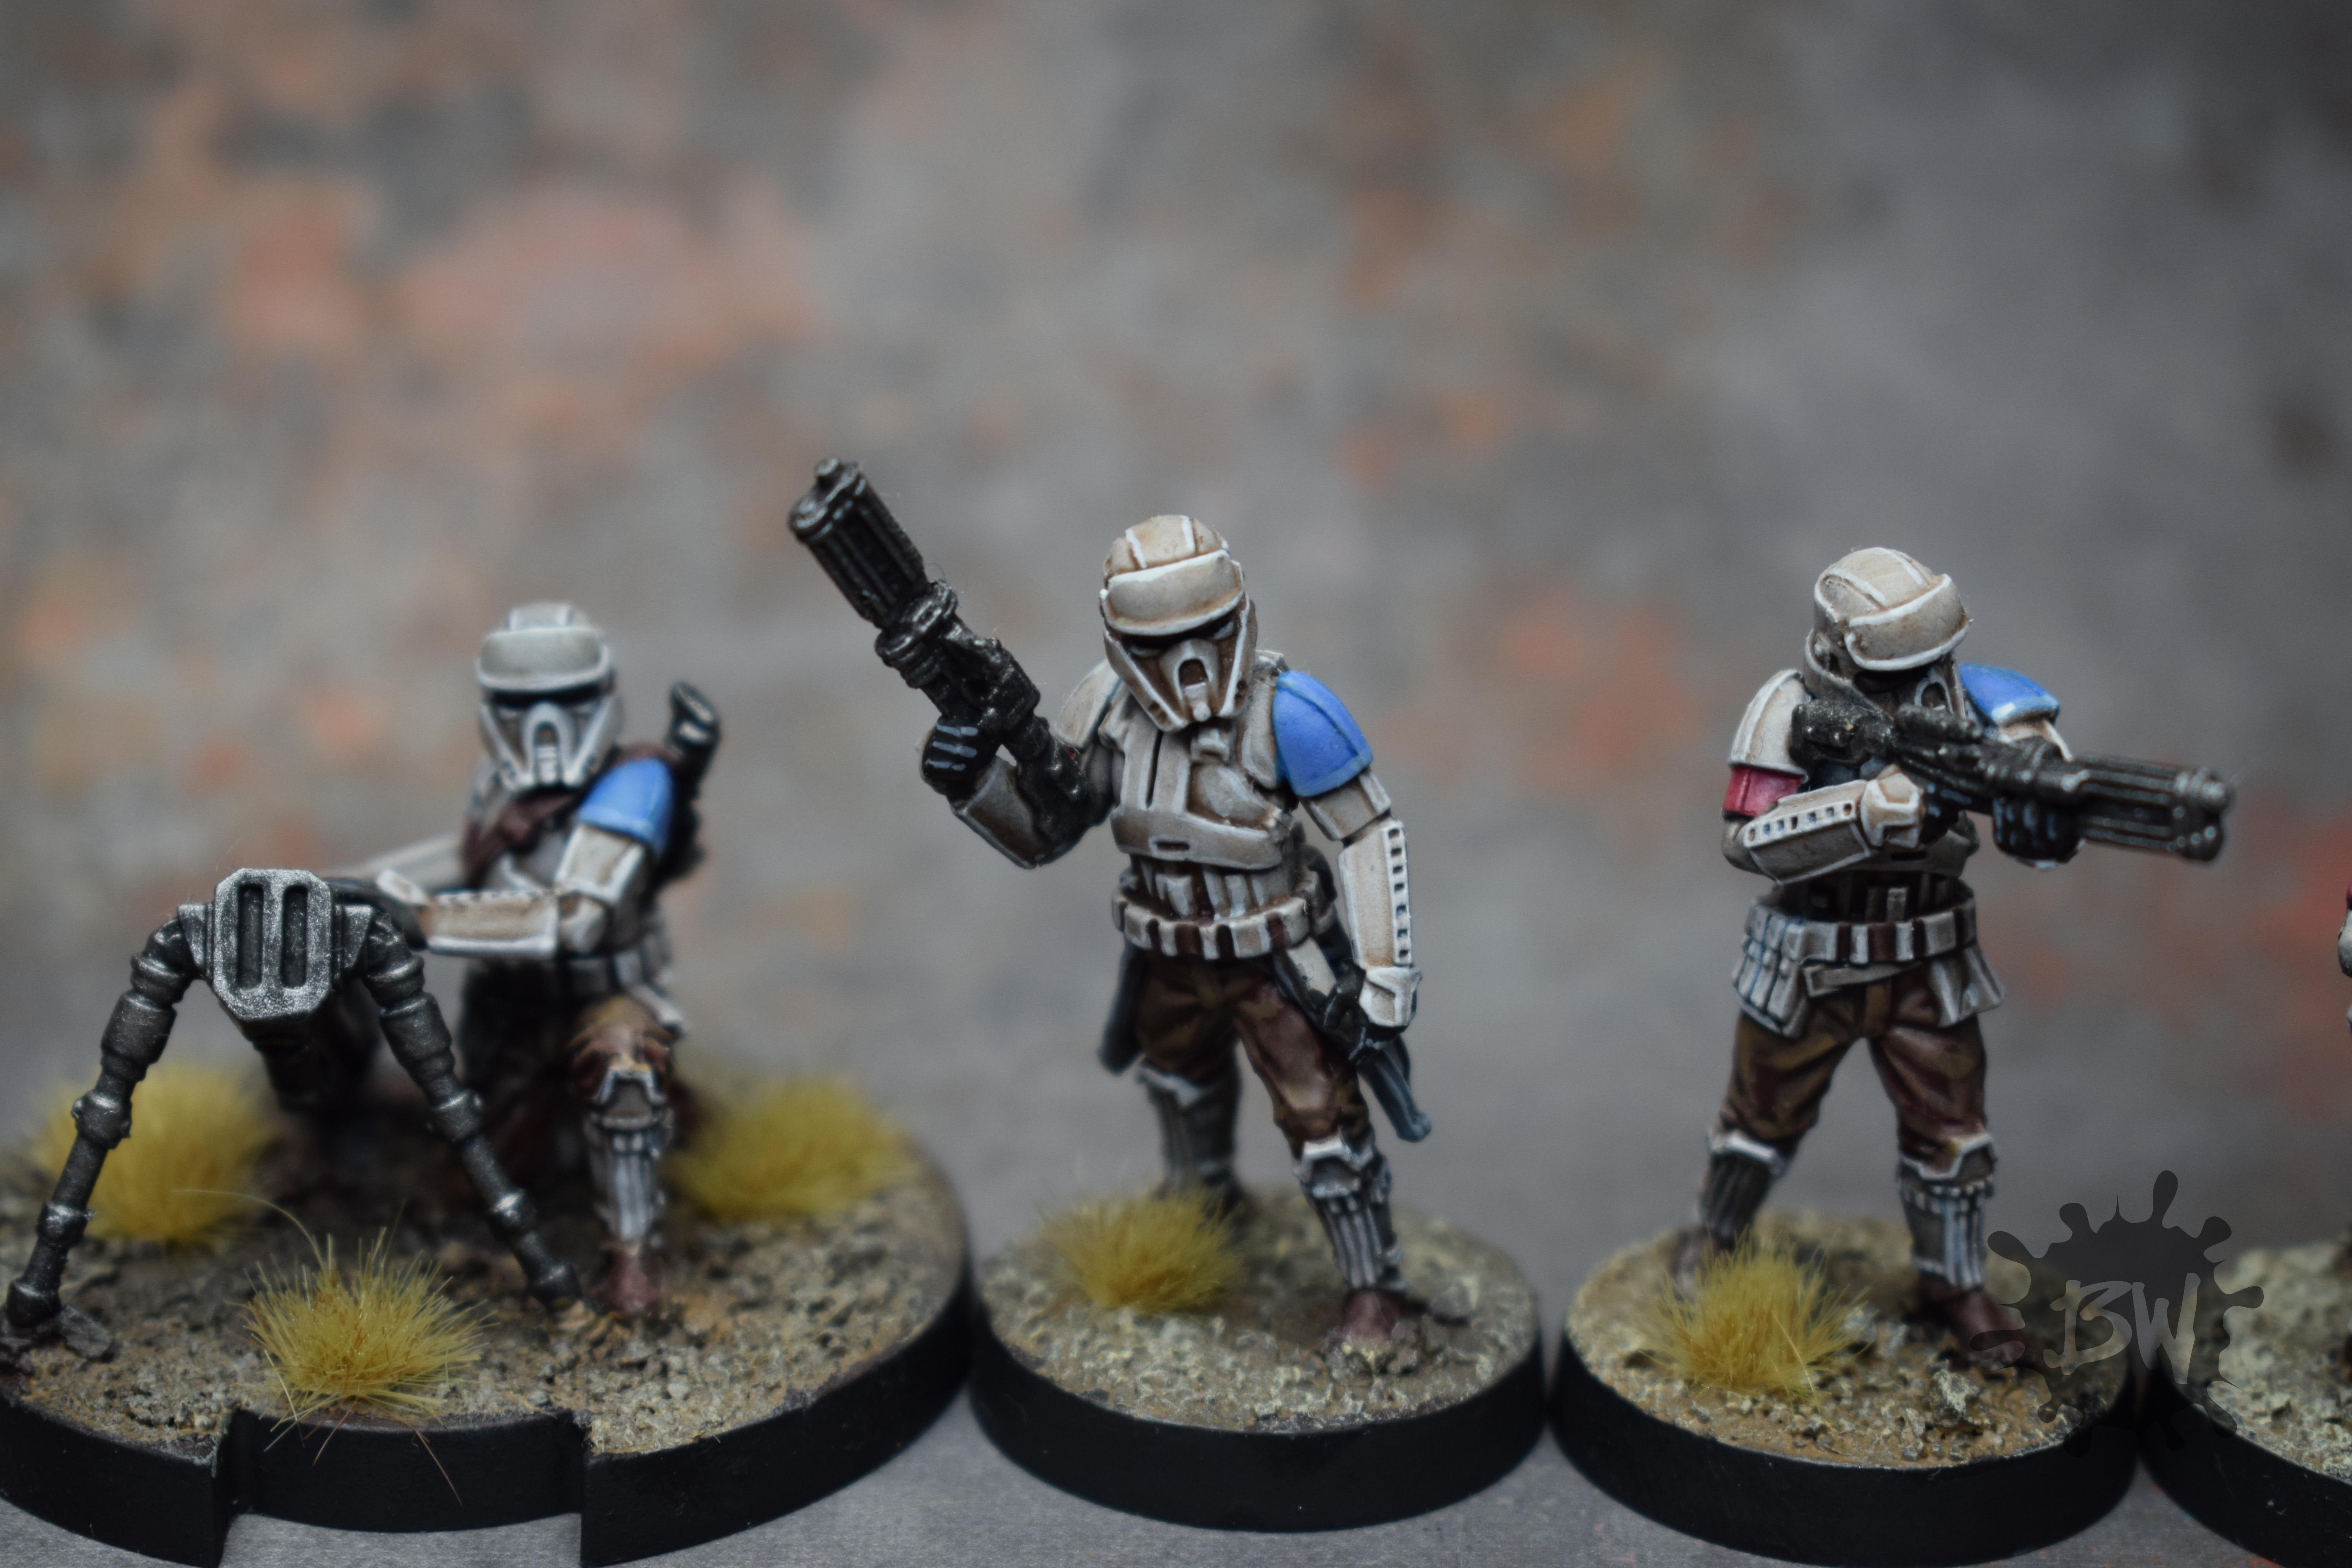 Amg, Army, Atomic Mass Games, Bw, Imperial Shoretroopers, Star Wars Legion, Swl